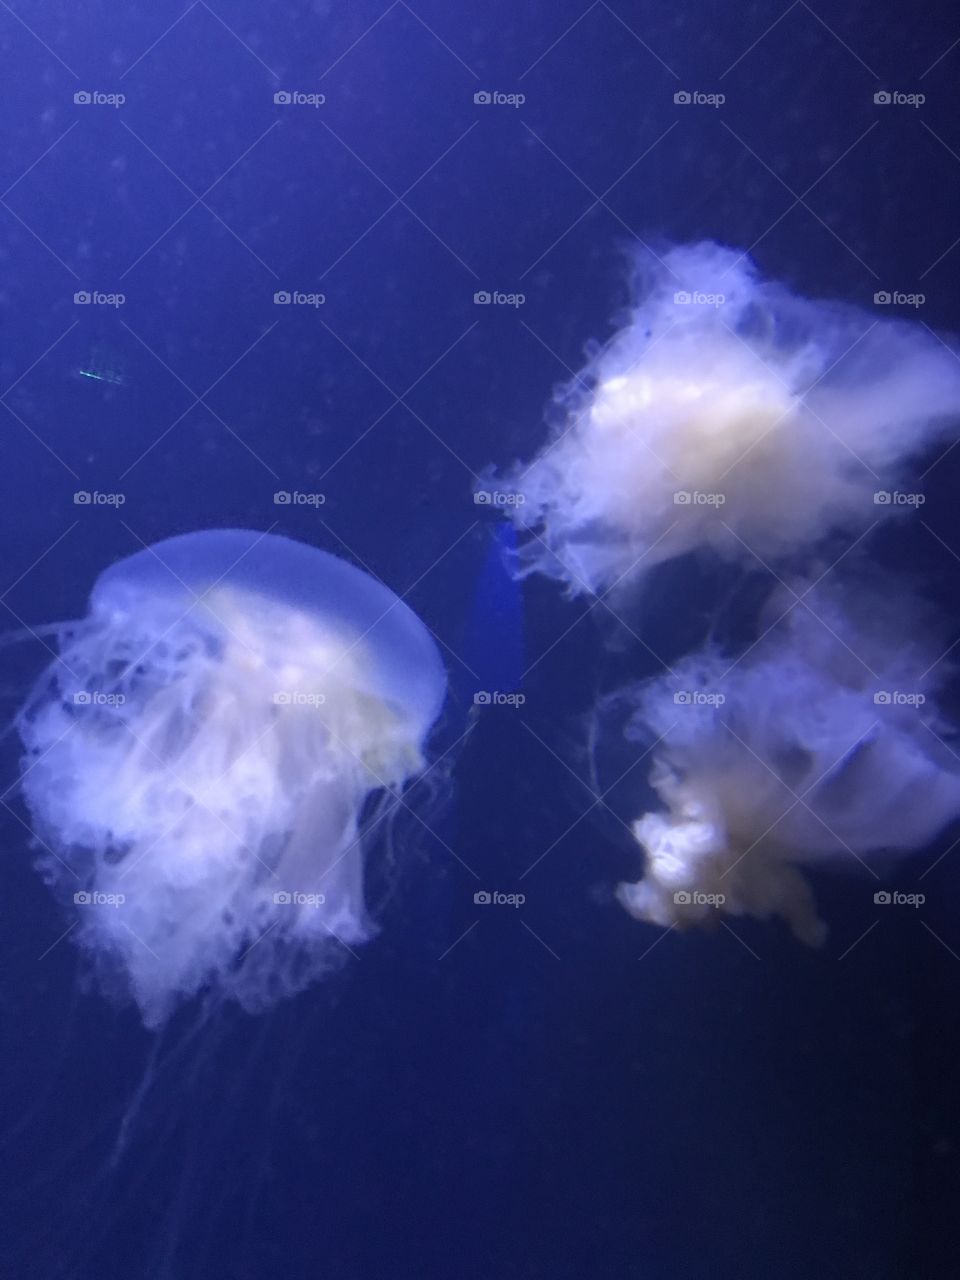 Egg yoke Jellyfish that resemble soft clouds or cotton. Simply beautiful! 